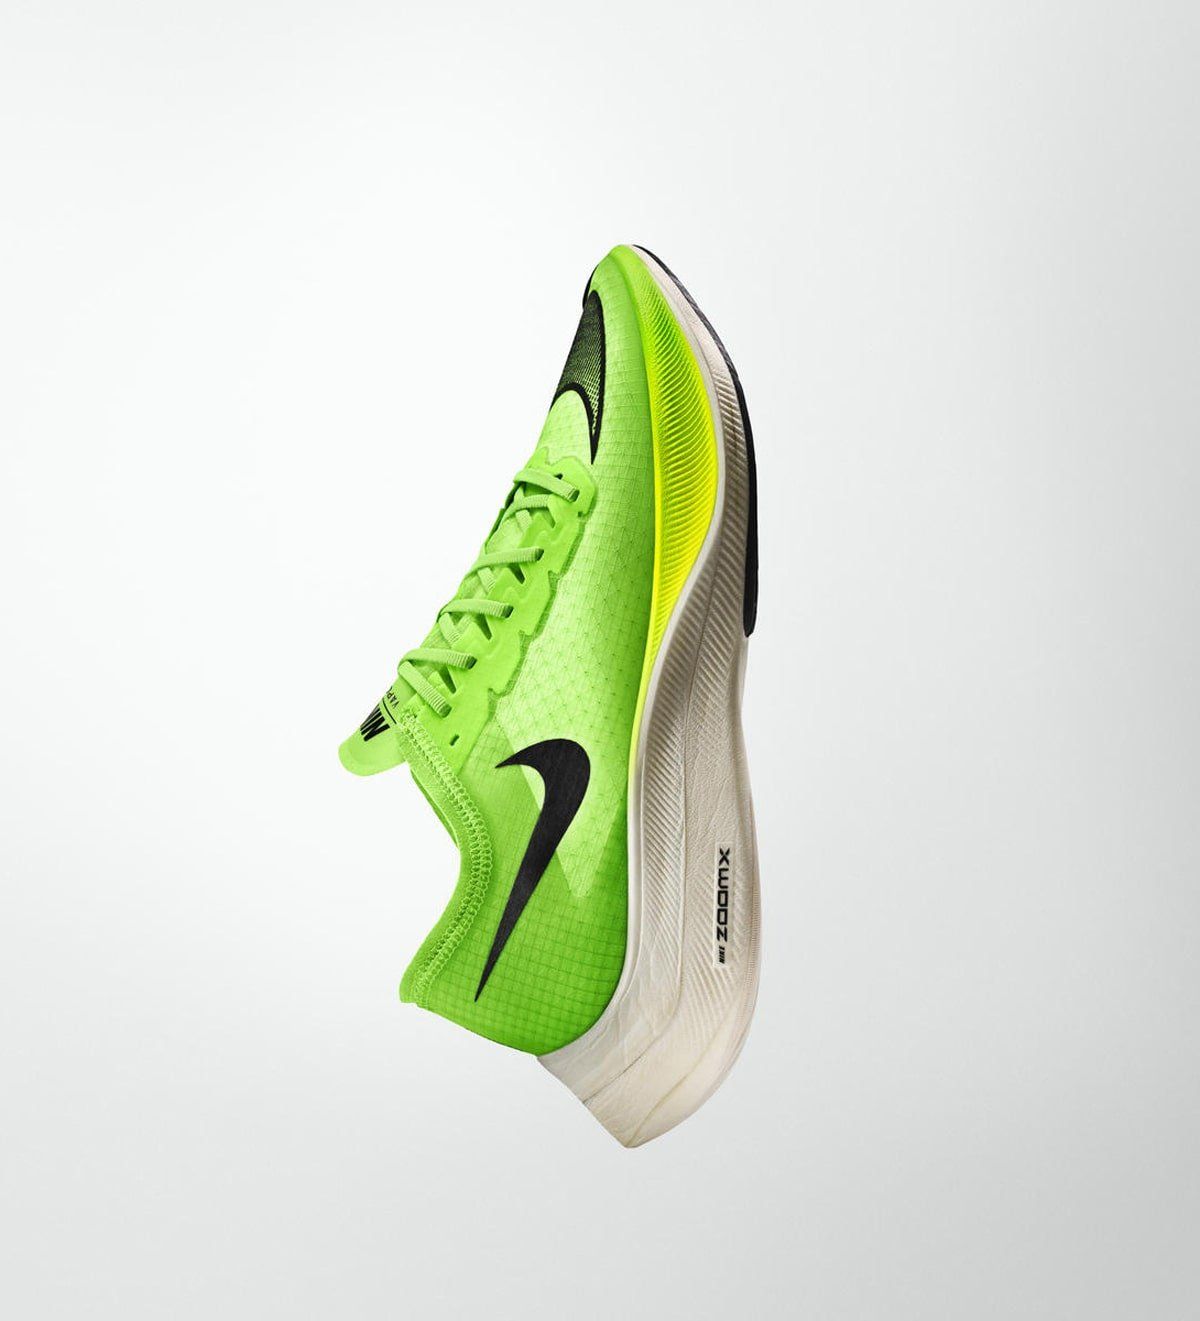 zoomx vaporfly next release date